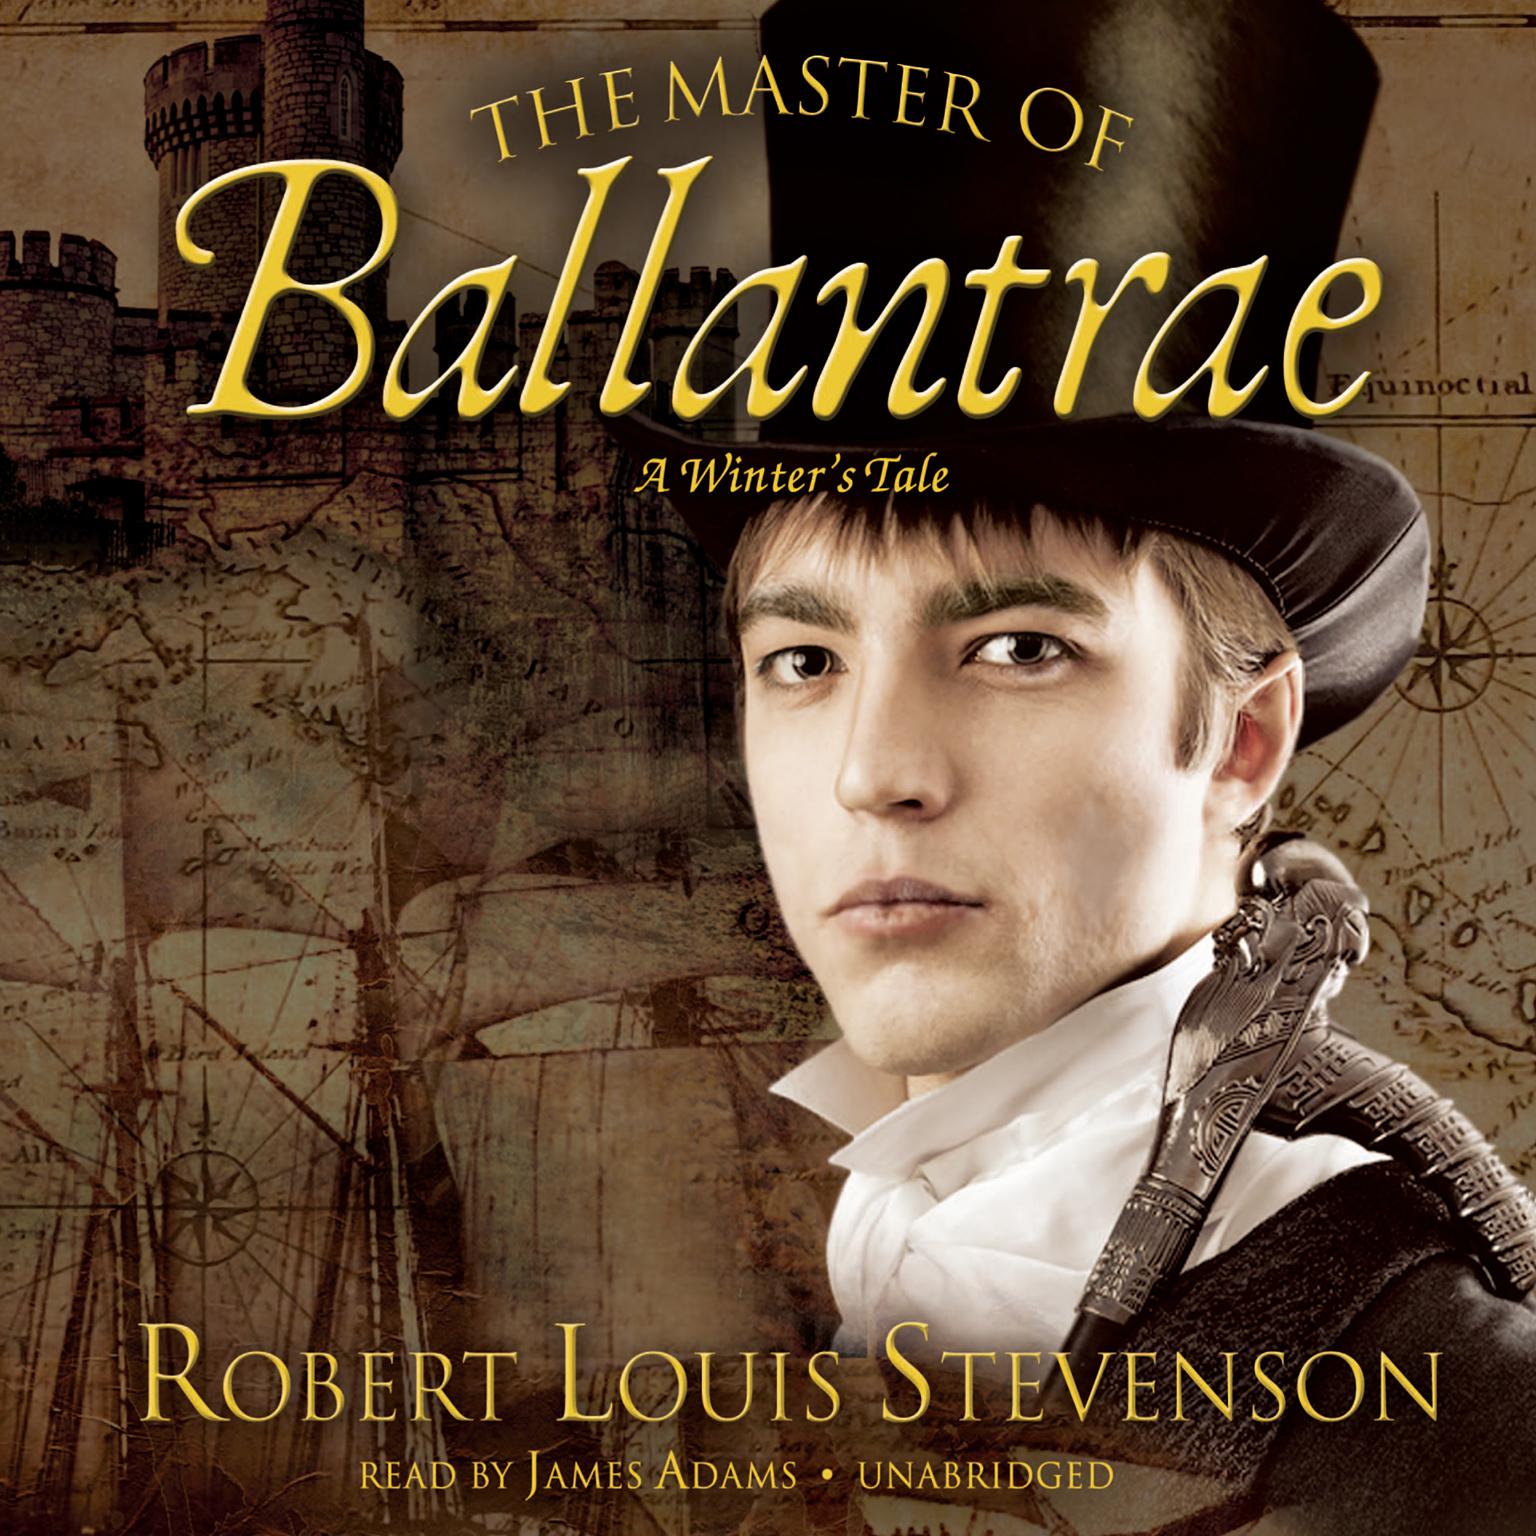 The Master of Ballantrae: A Winter’s Tale Audiobook, by Robert Louis Stevenson